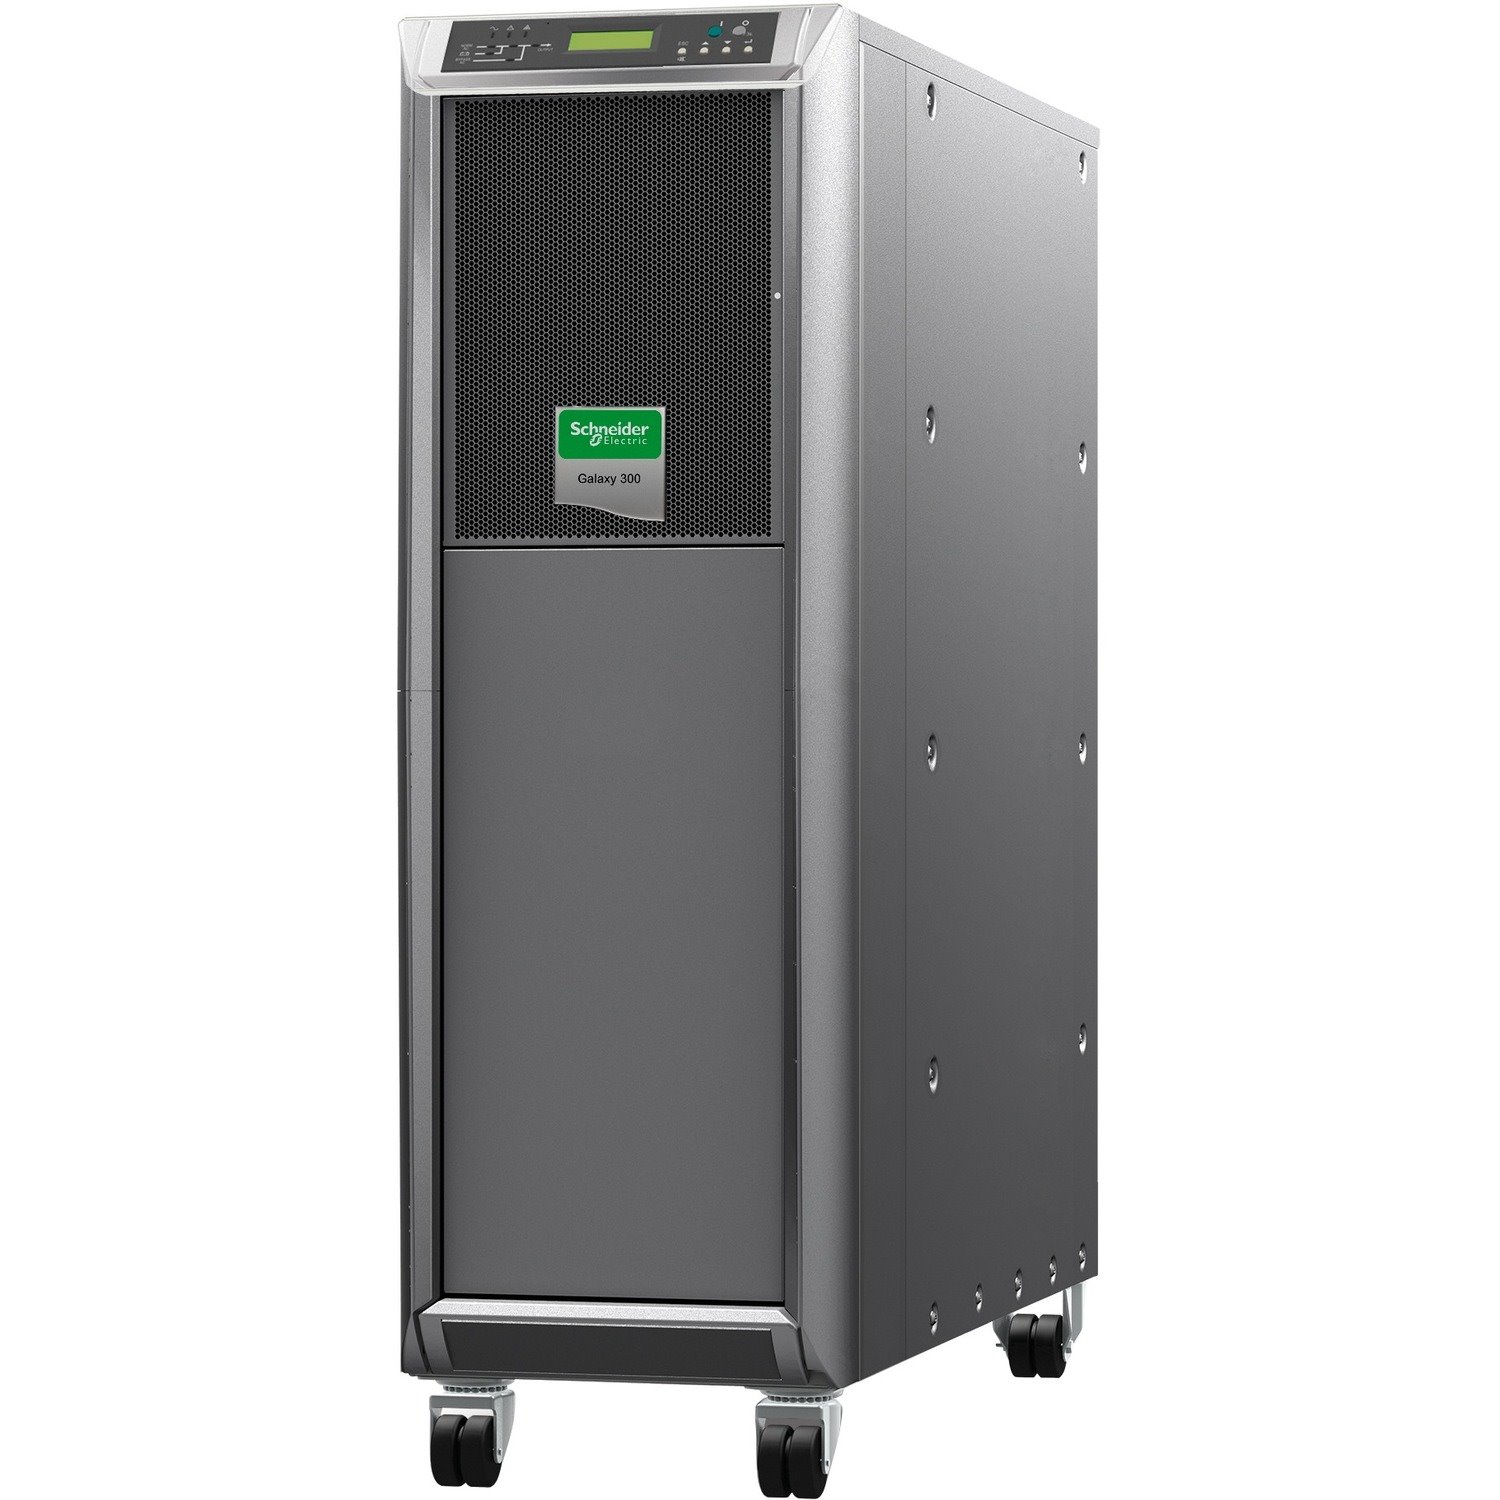 APC by Schneider Electric MGE Galaxy Double Conversion Online UPS - 10 kVA - Three Phase